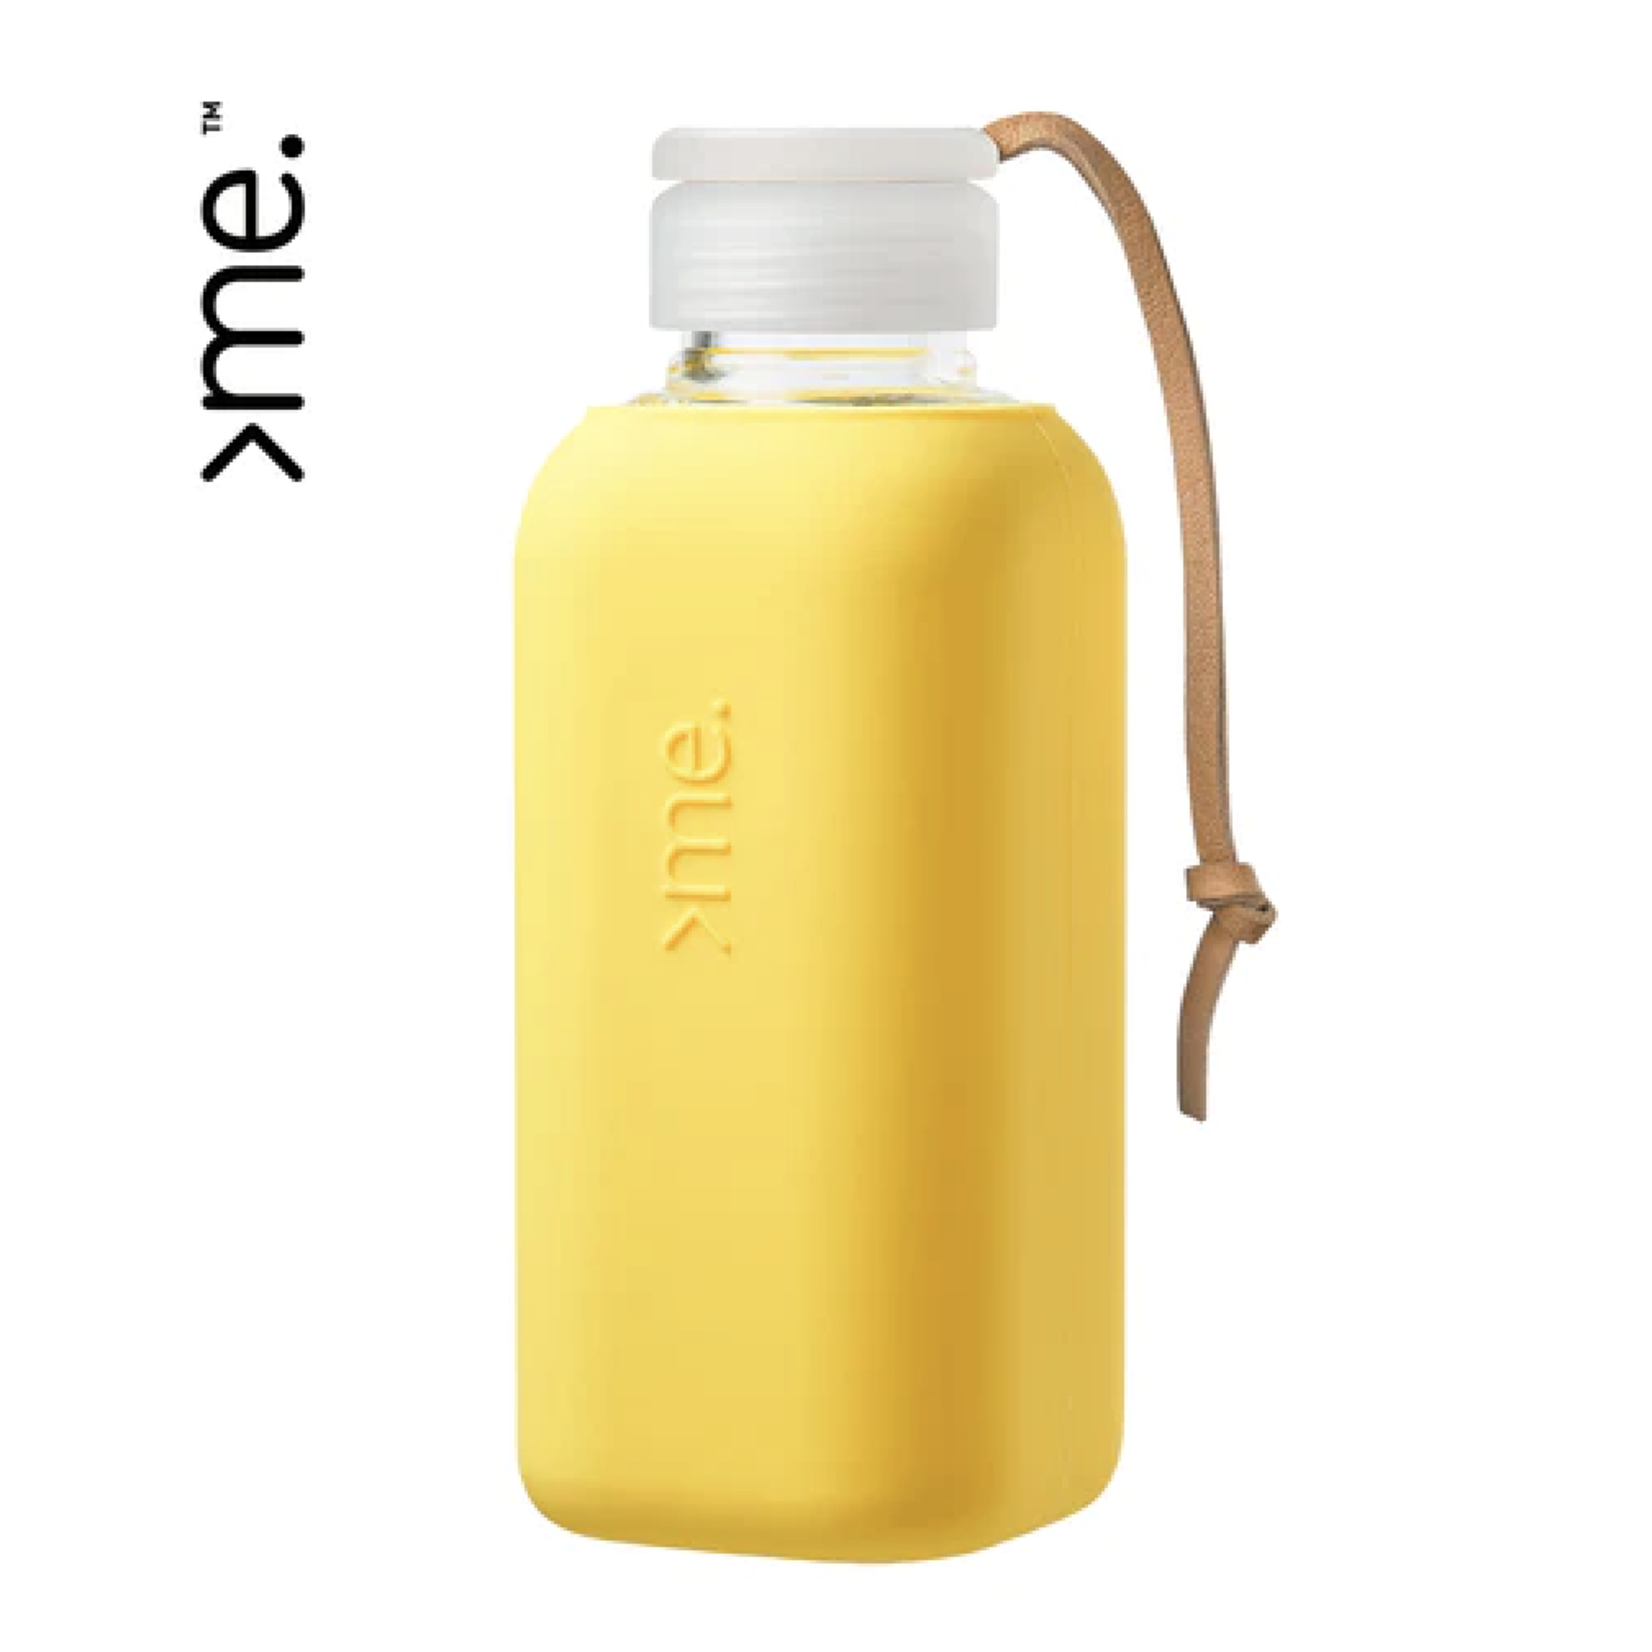 Squireme Bouteille SQUIREME 600 ml